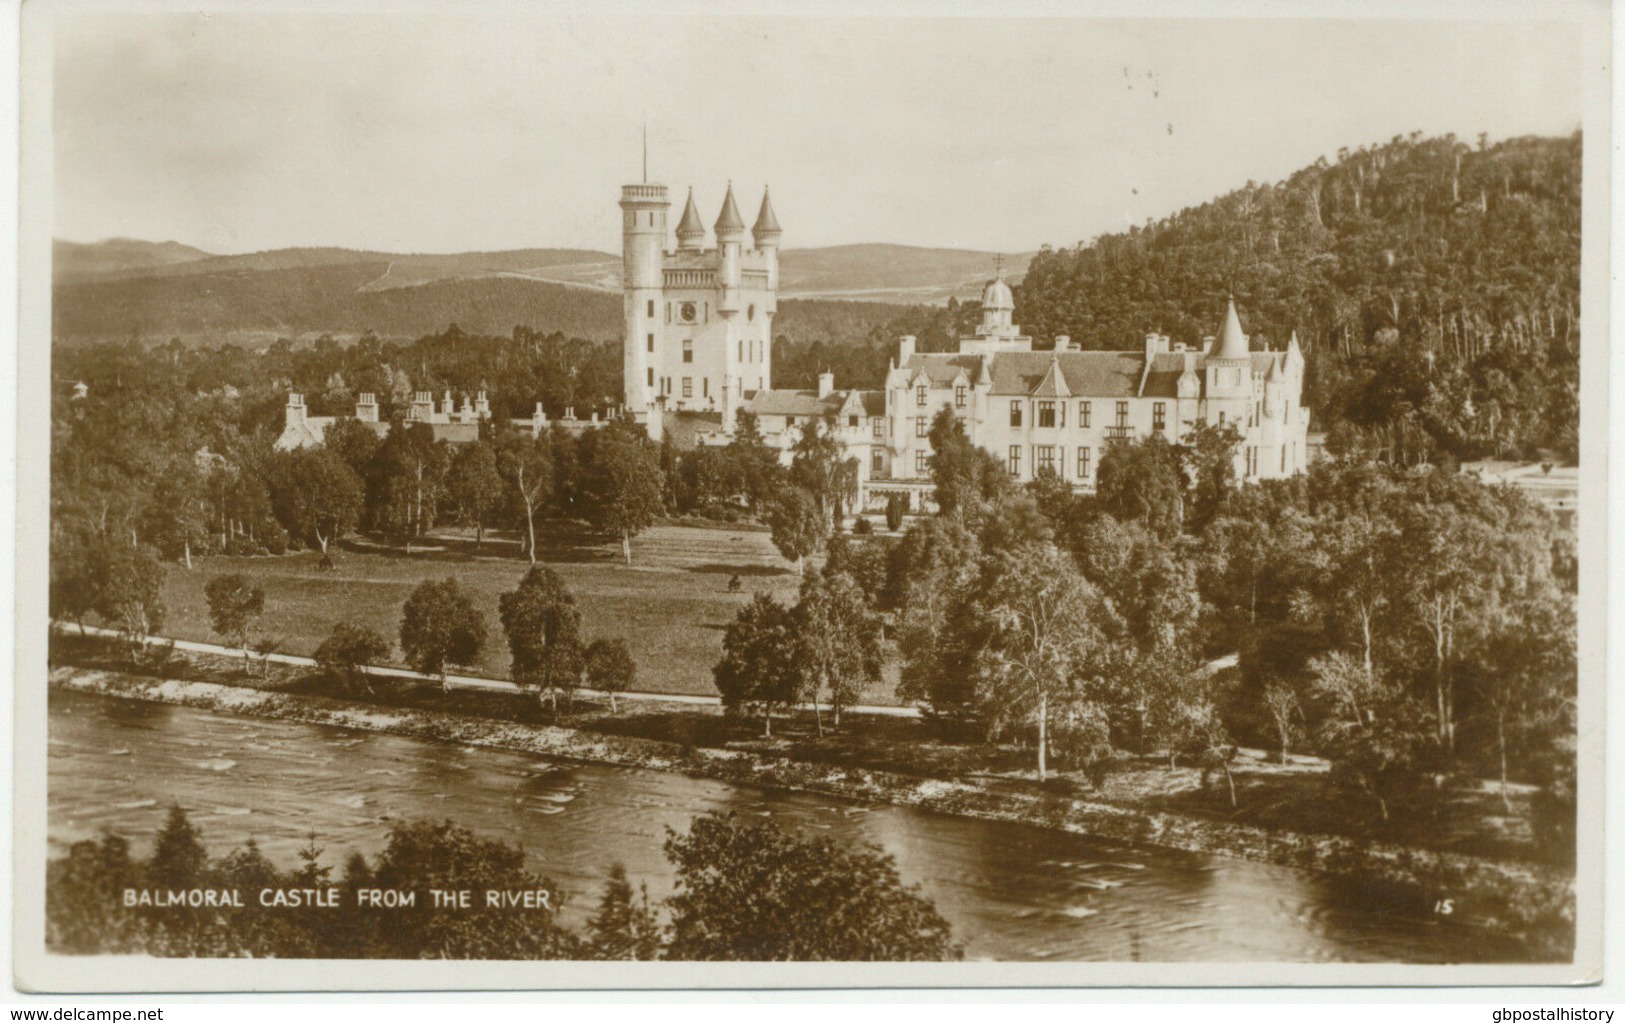 UK BALMORAL CASTLE (private Property Of The Royal Family) From The River, 1930 - Aberdeenshire